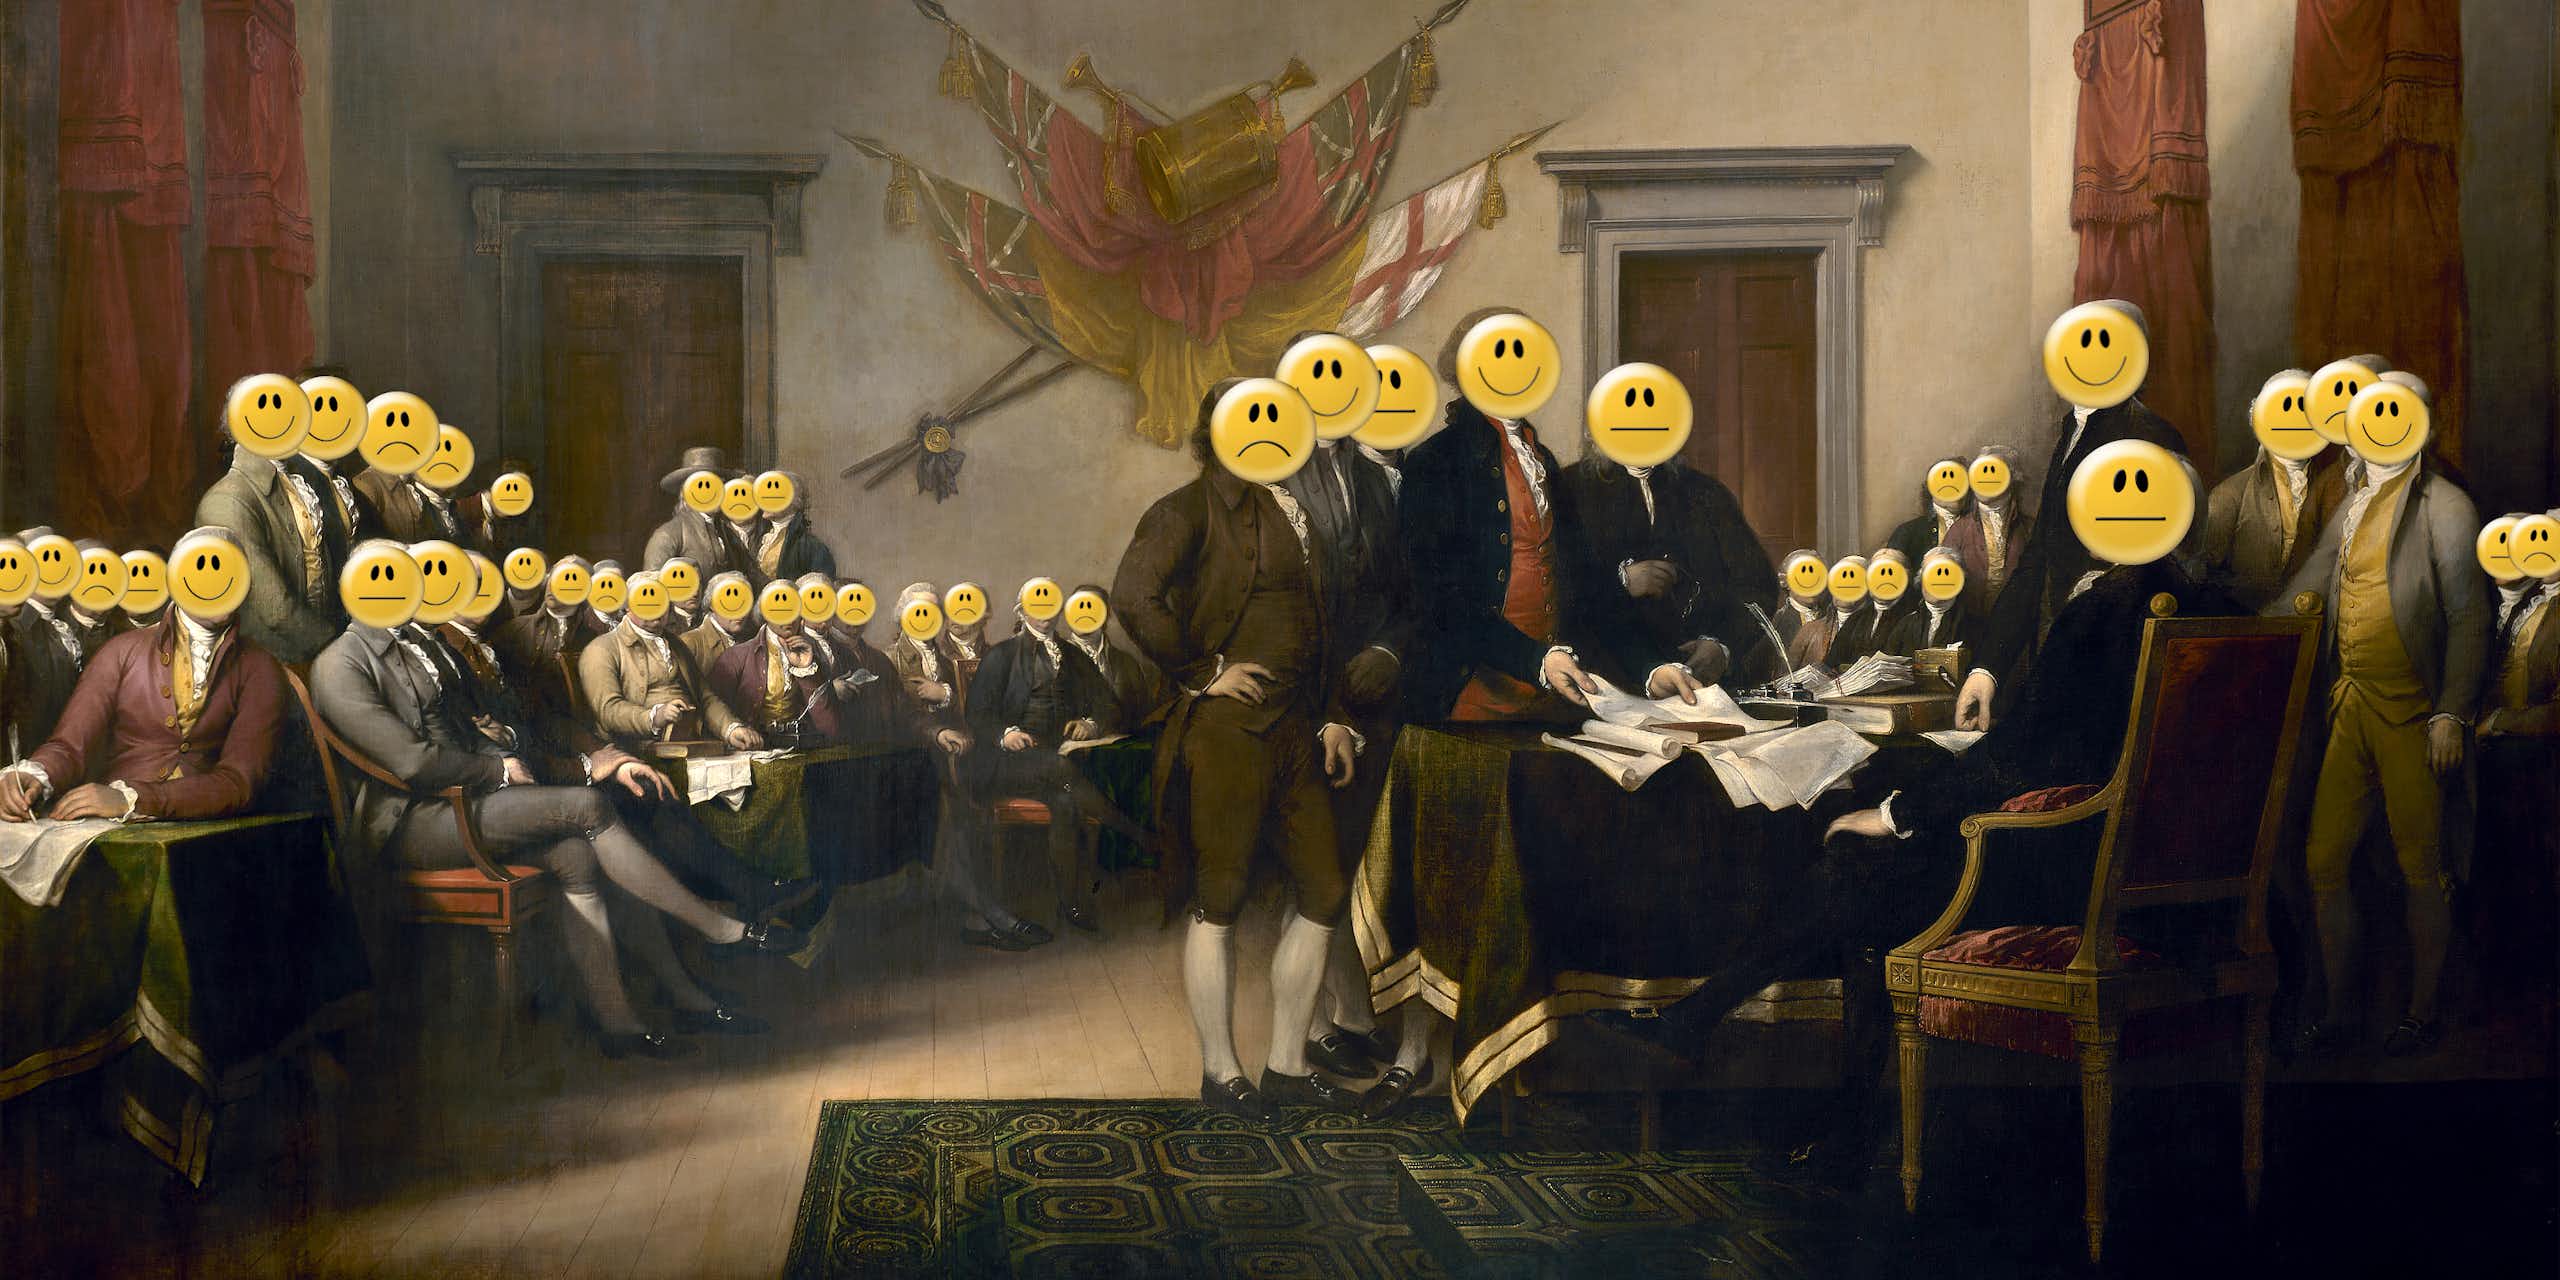 a painting of a group of men wearing 18th-century clothing with emoticons covering their faces